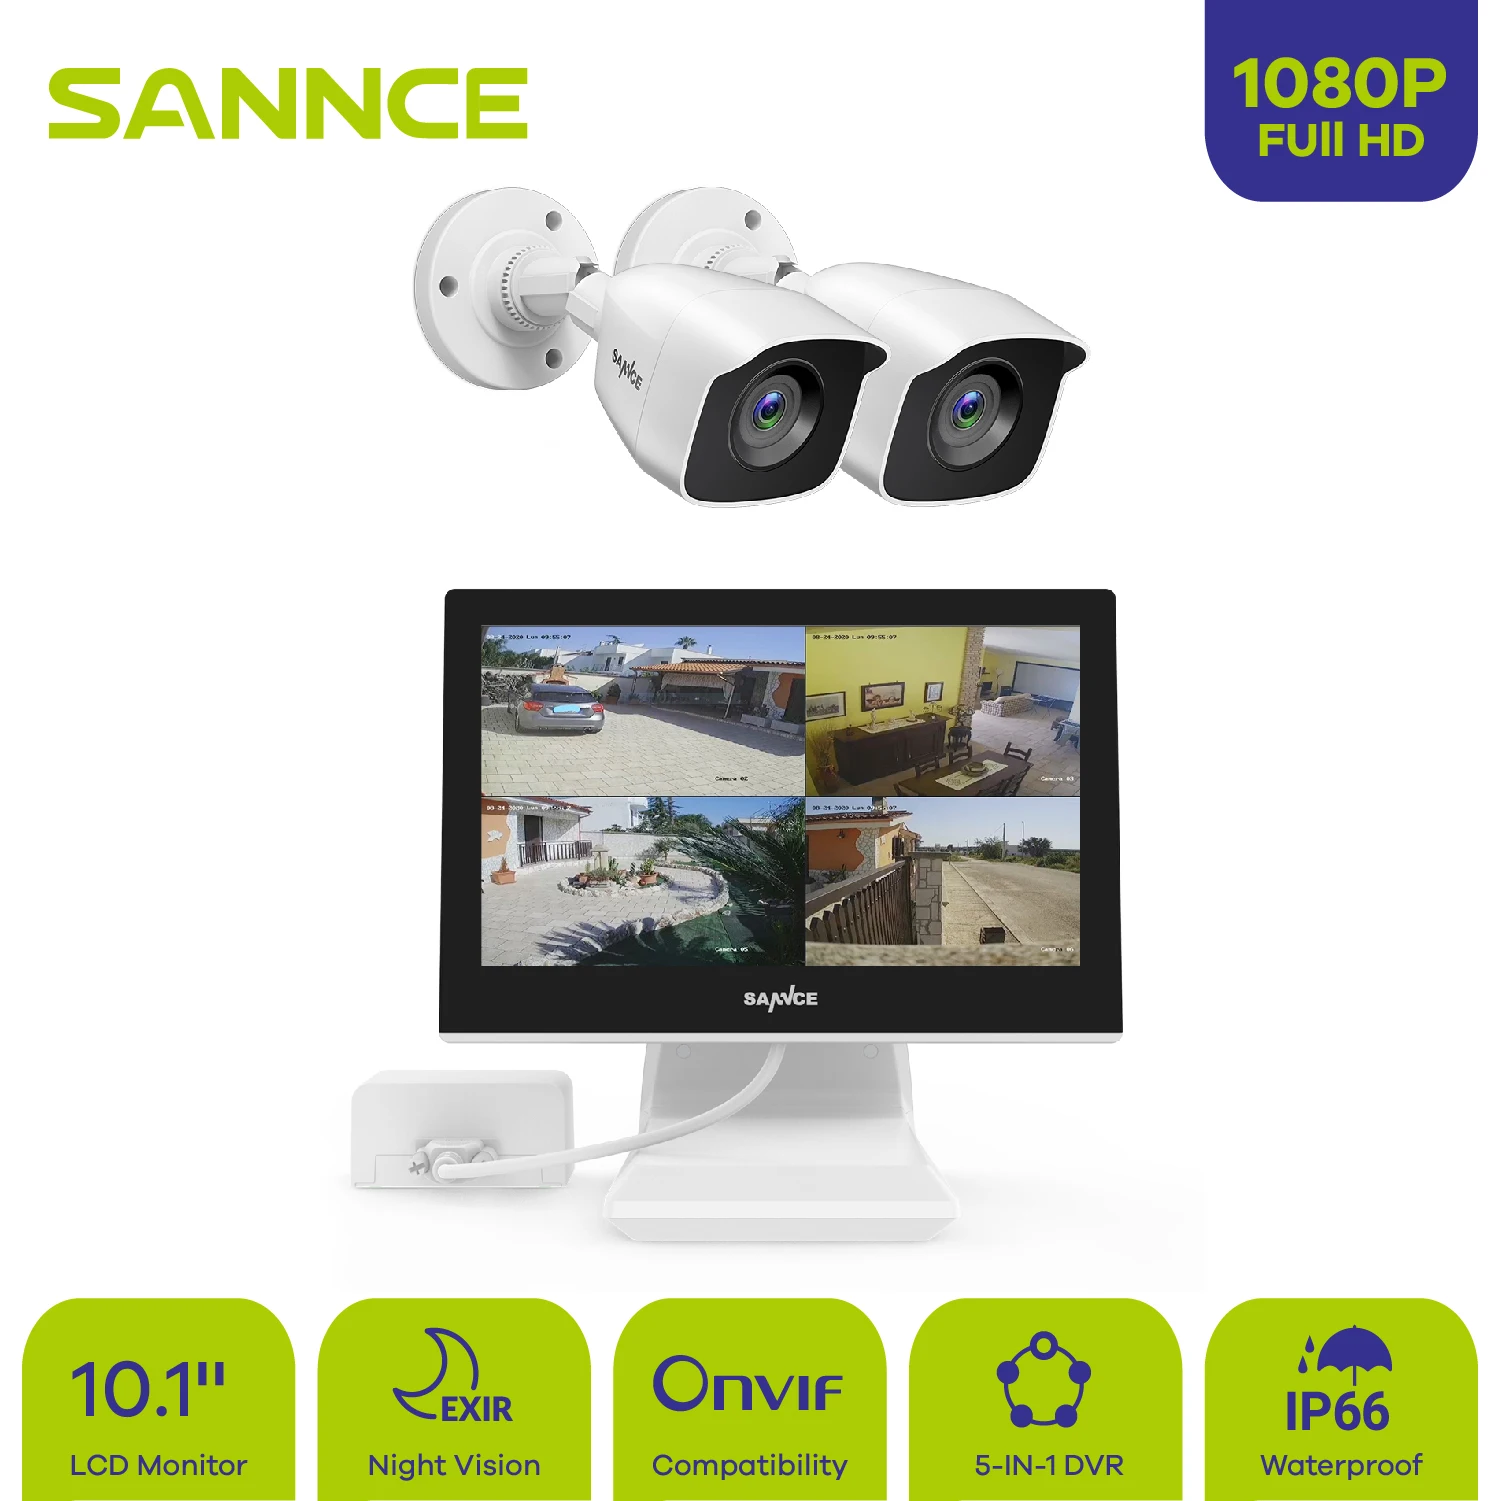 

SANNCE 10"1 LCD Monitor 5in1 4CH DVR with 4PCS 1080P CCTV IP66 Waterproof Indoor Outdoor Security Bullet Camera System White